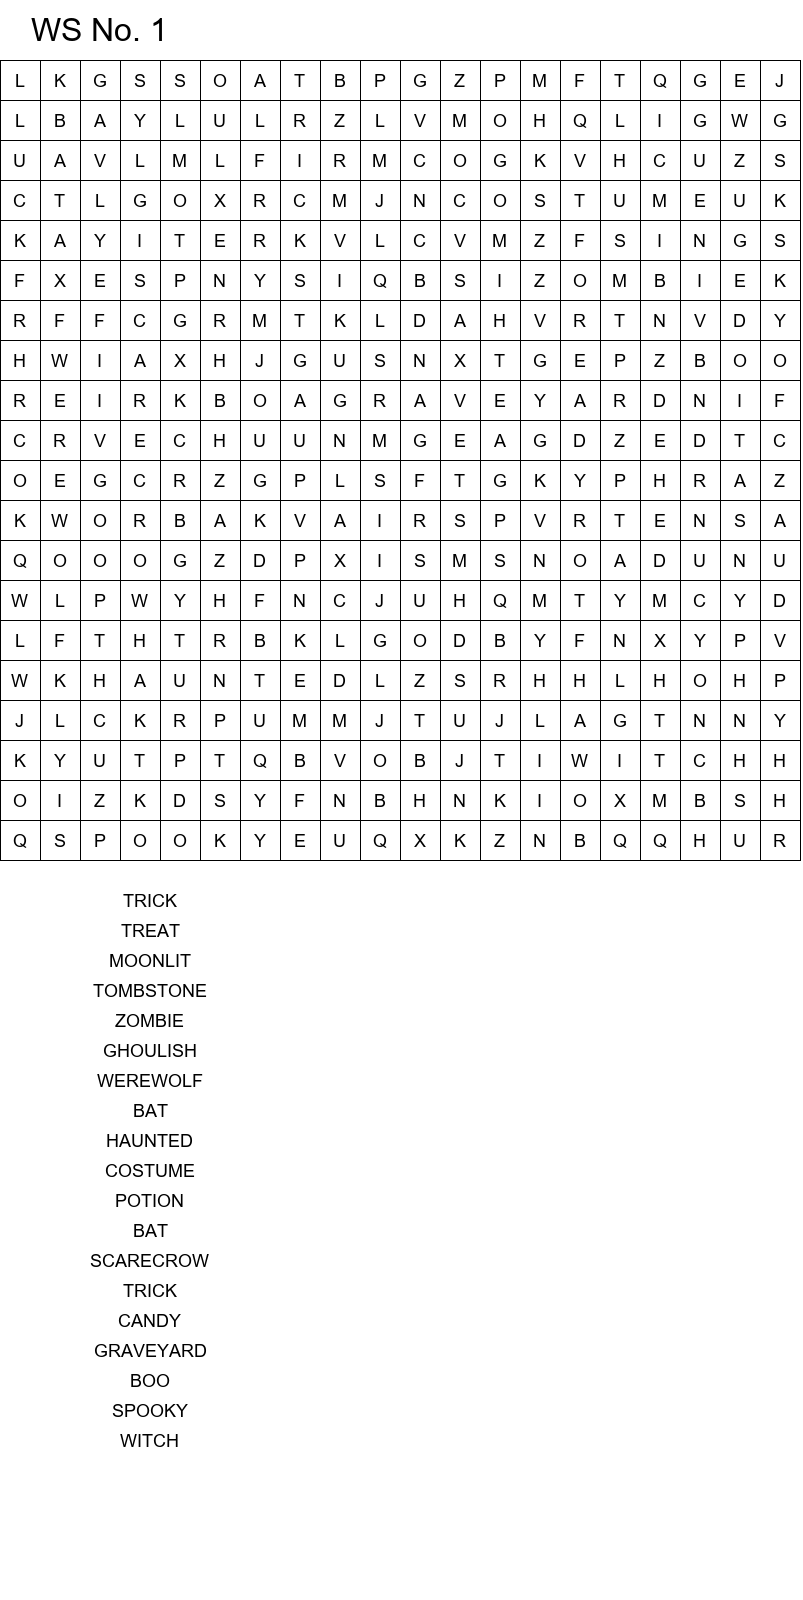 Free online Halloween word search puzzles size 20x20 No 1